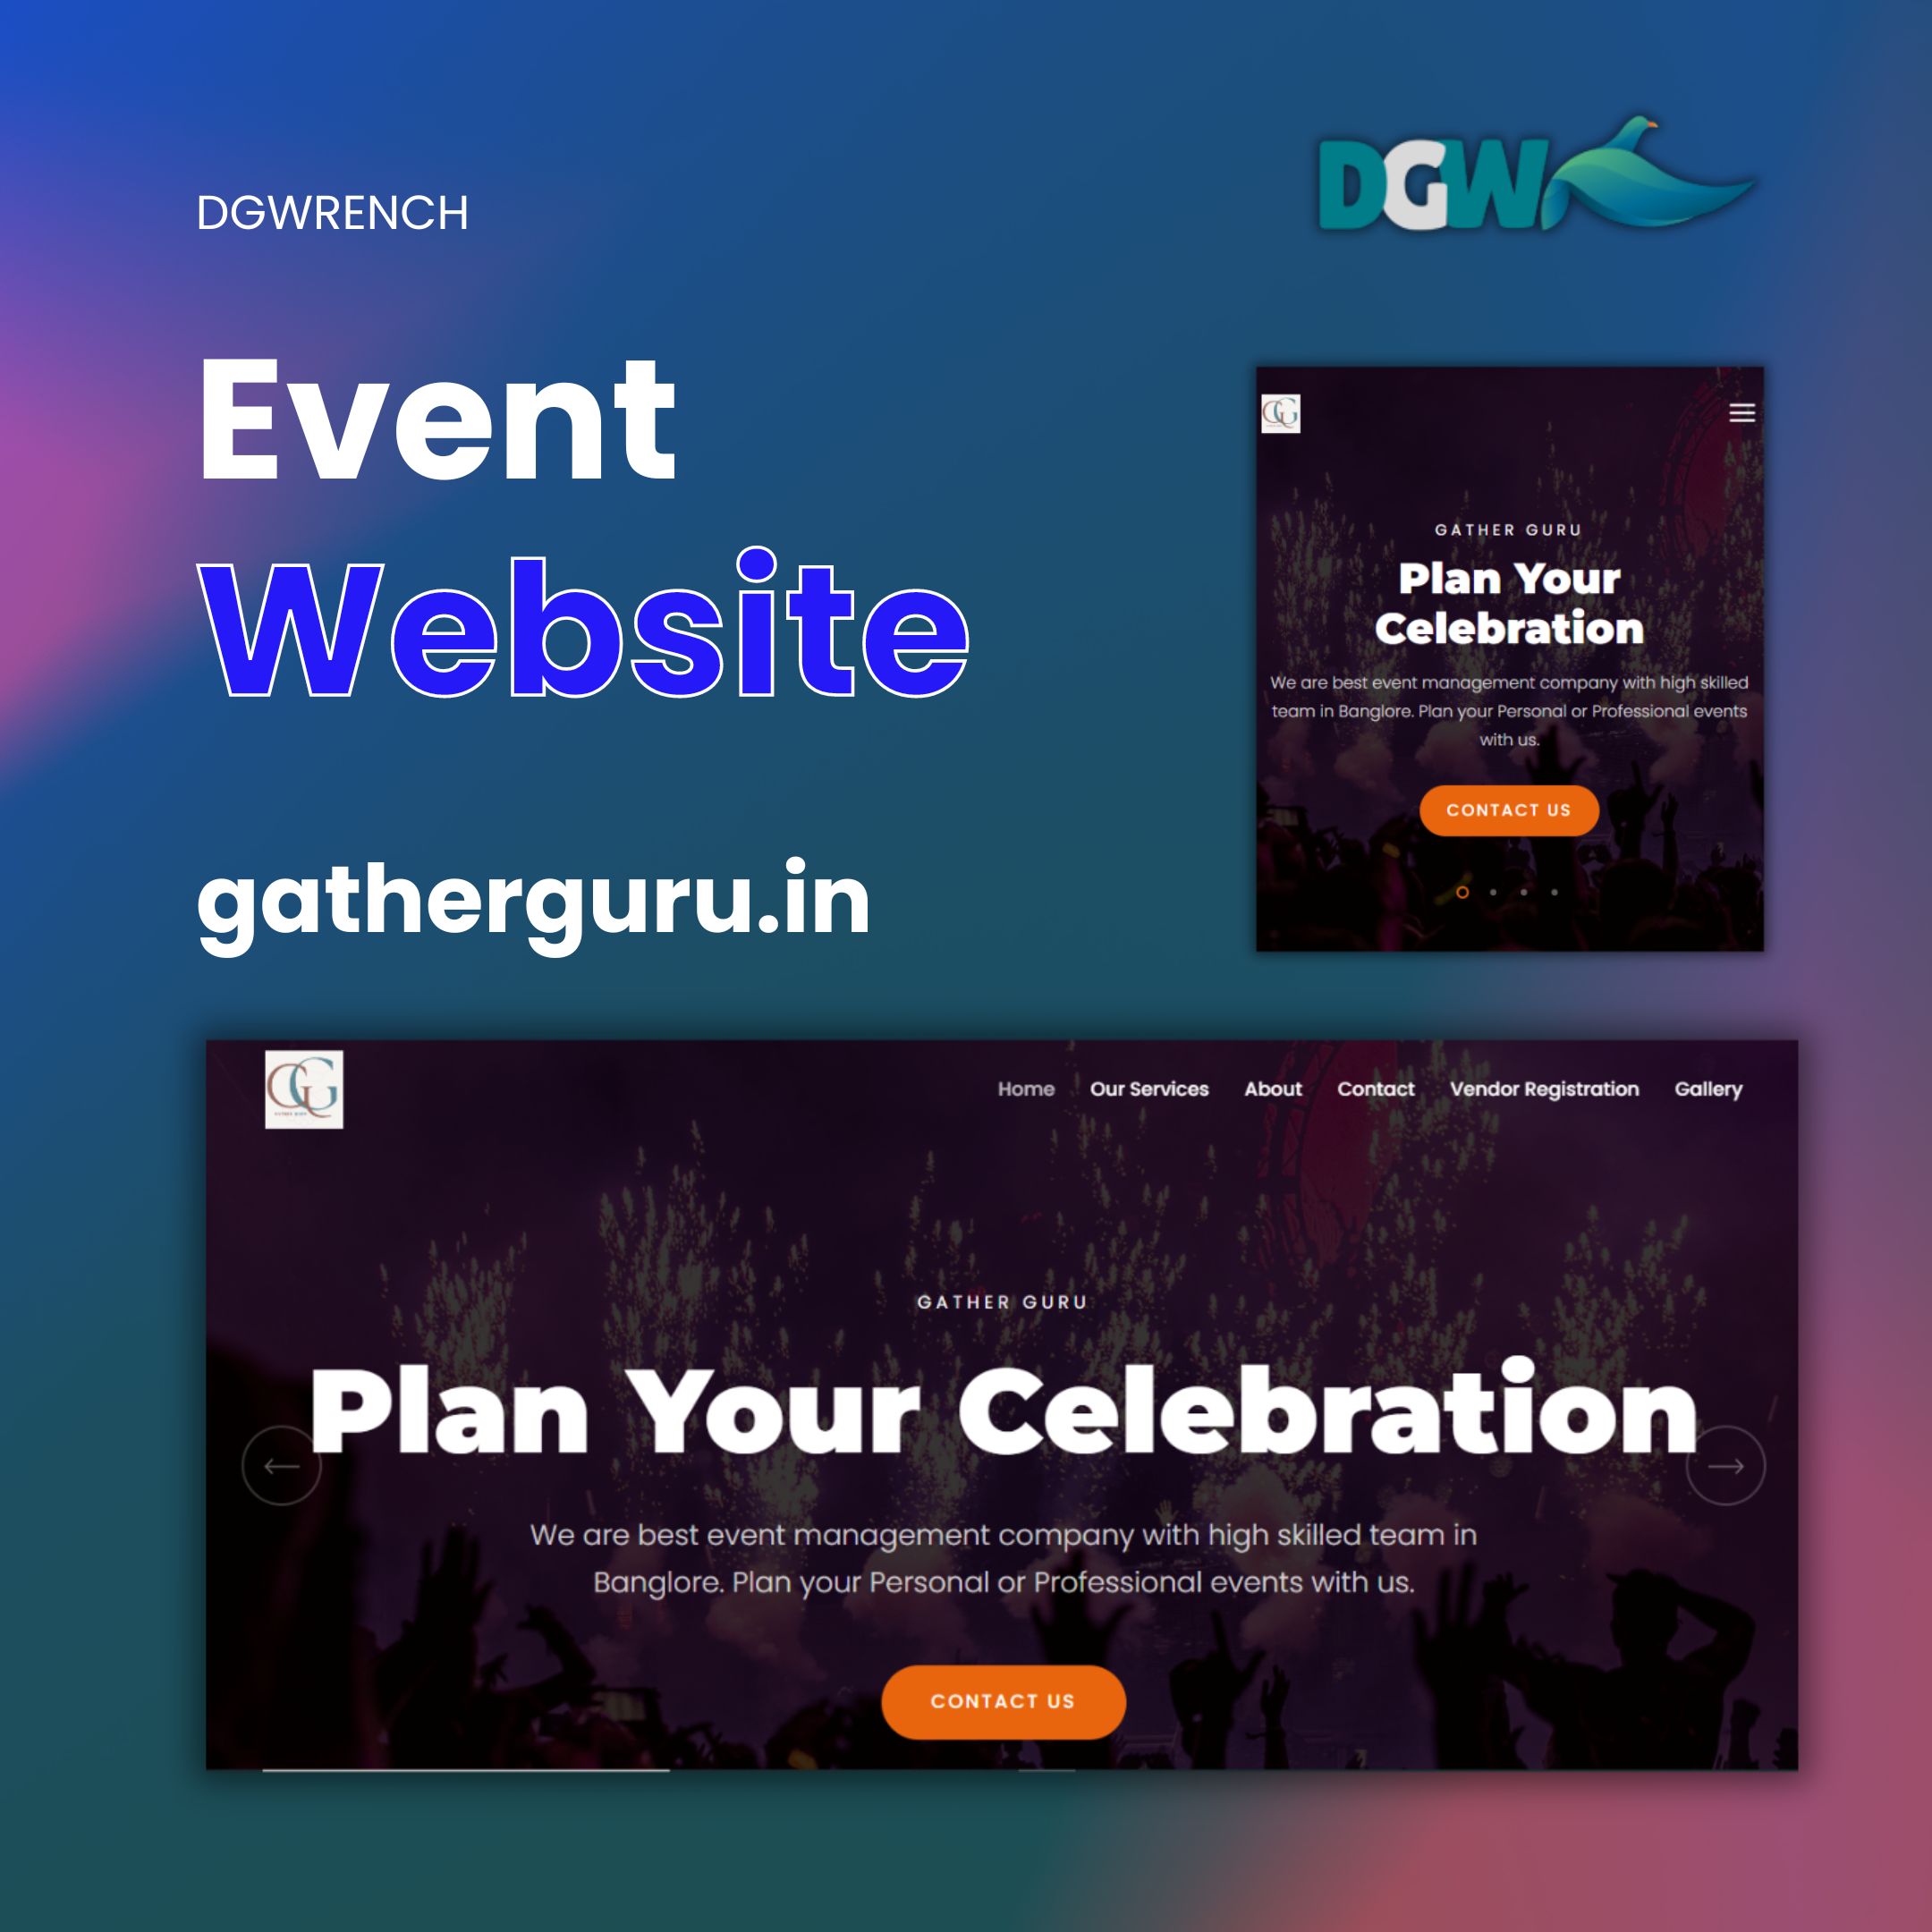 Event Website - dgwrench